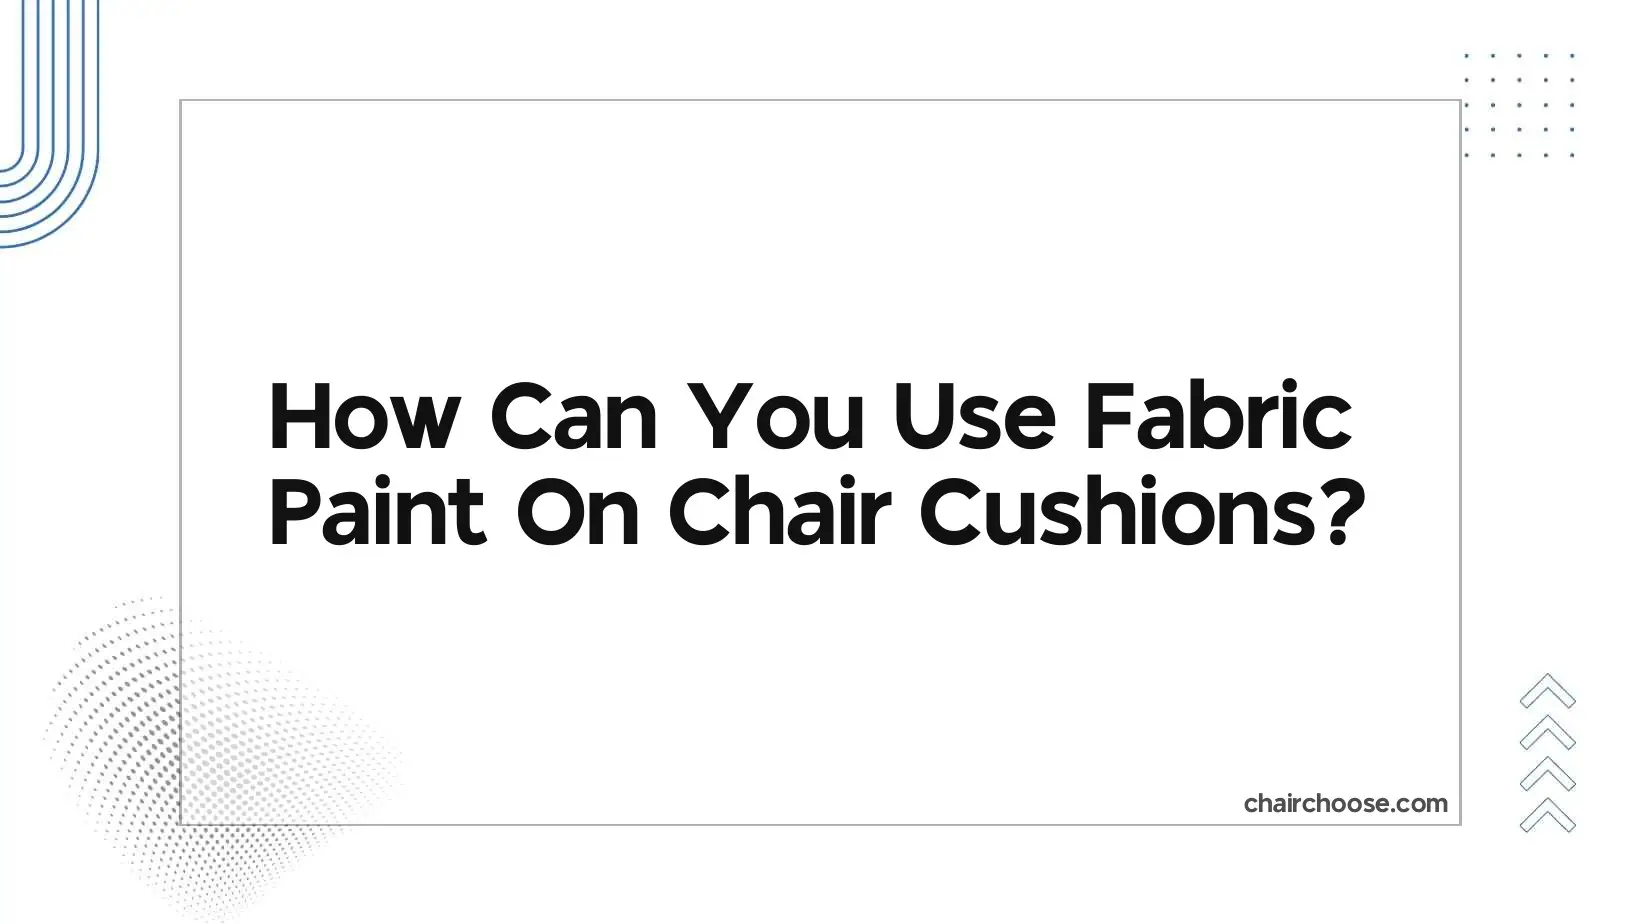 How Can You Use Fabric Paint On Chair Cushions?